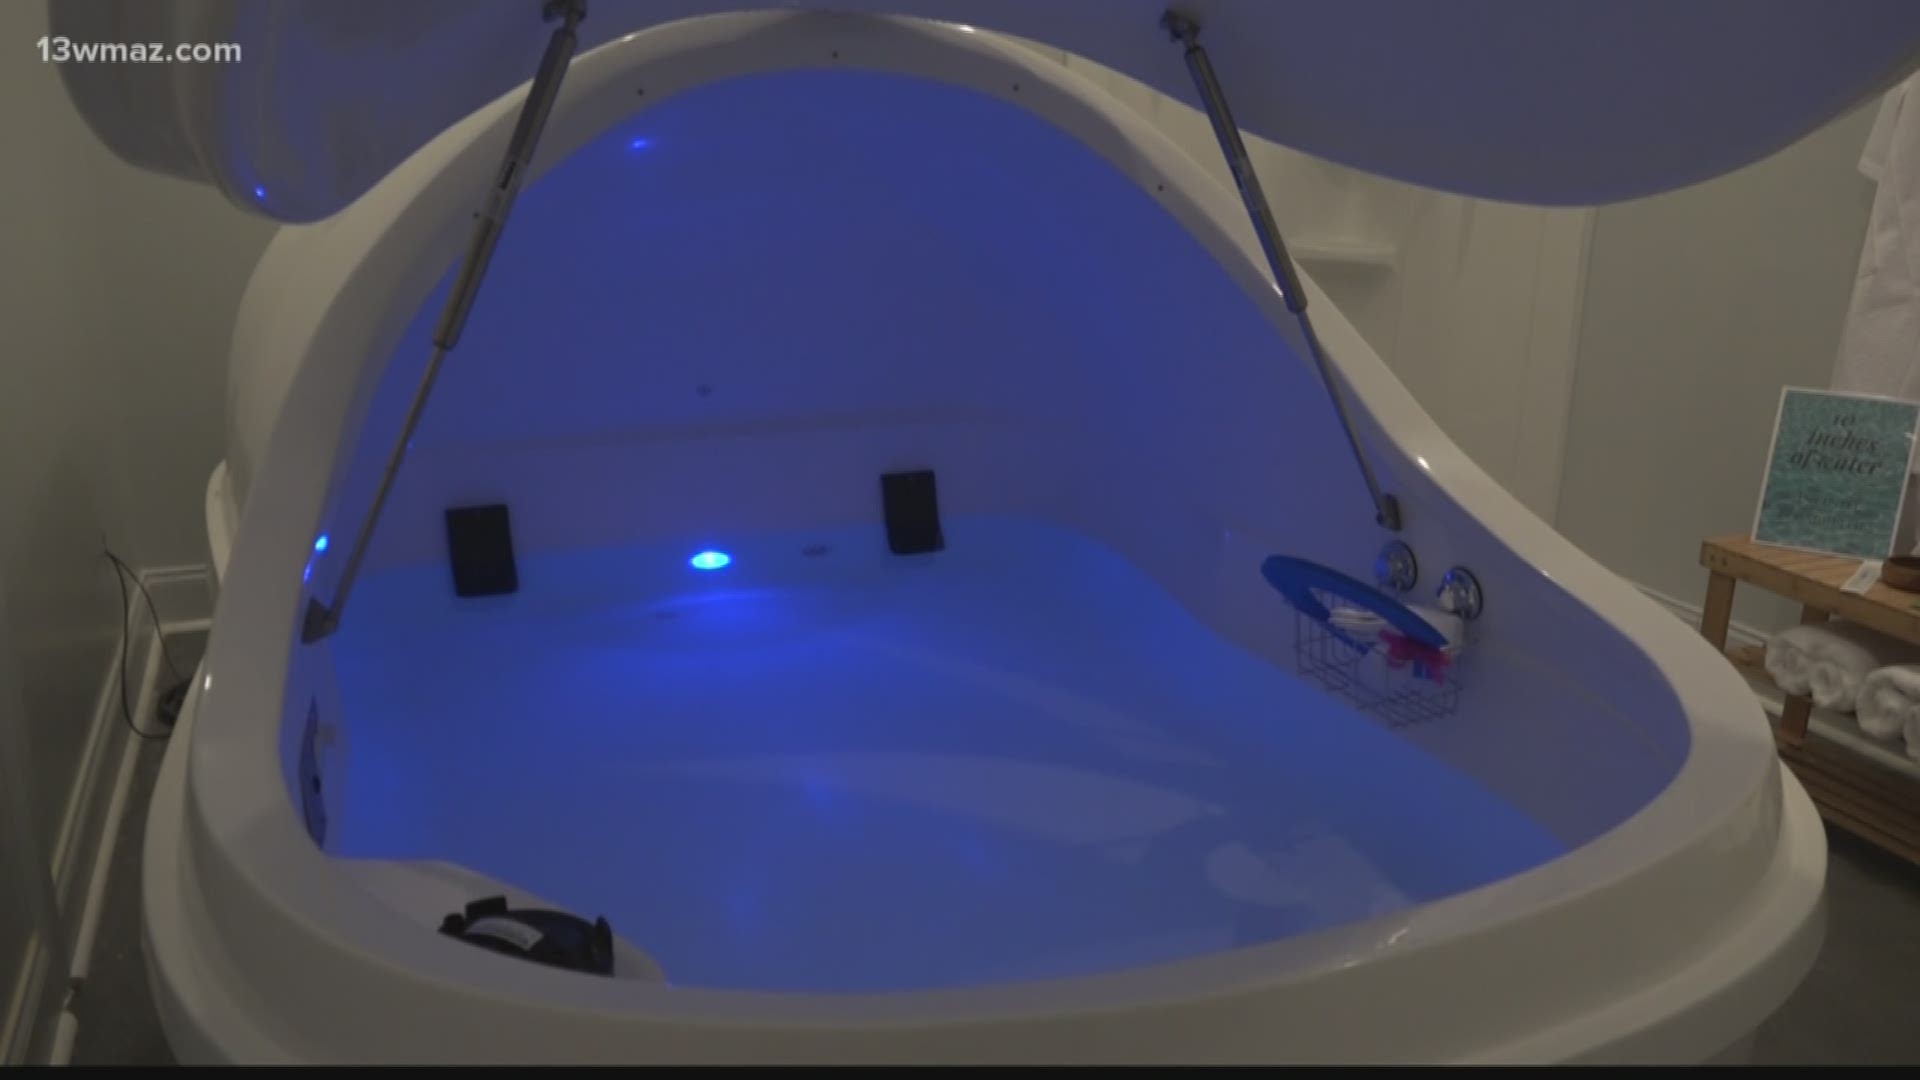 A company called Float Robins will soon offer "Float Pod" sessions inside sensory deprivation pods. Each one is filled with about 1,000 pounds of Epsom salt with about ten inches of water.